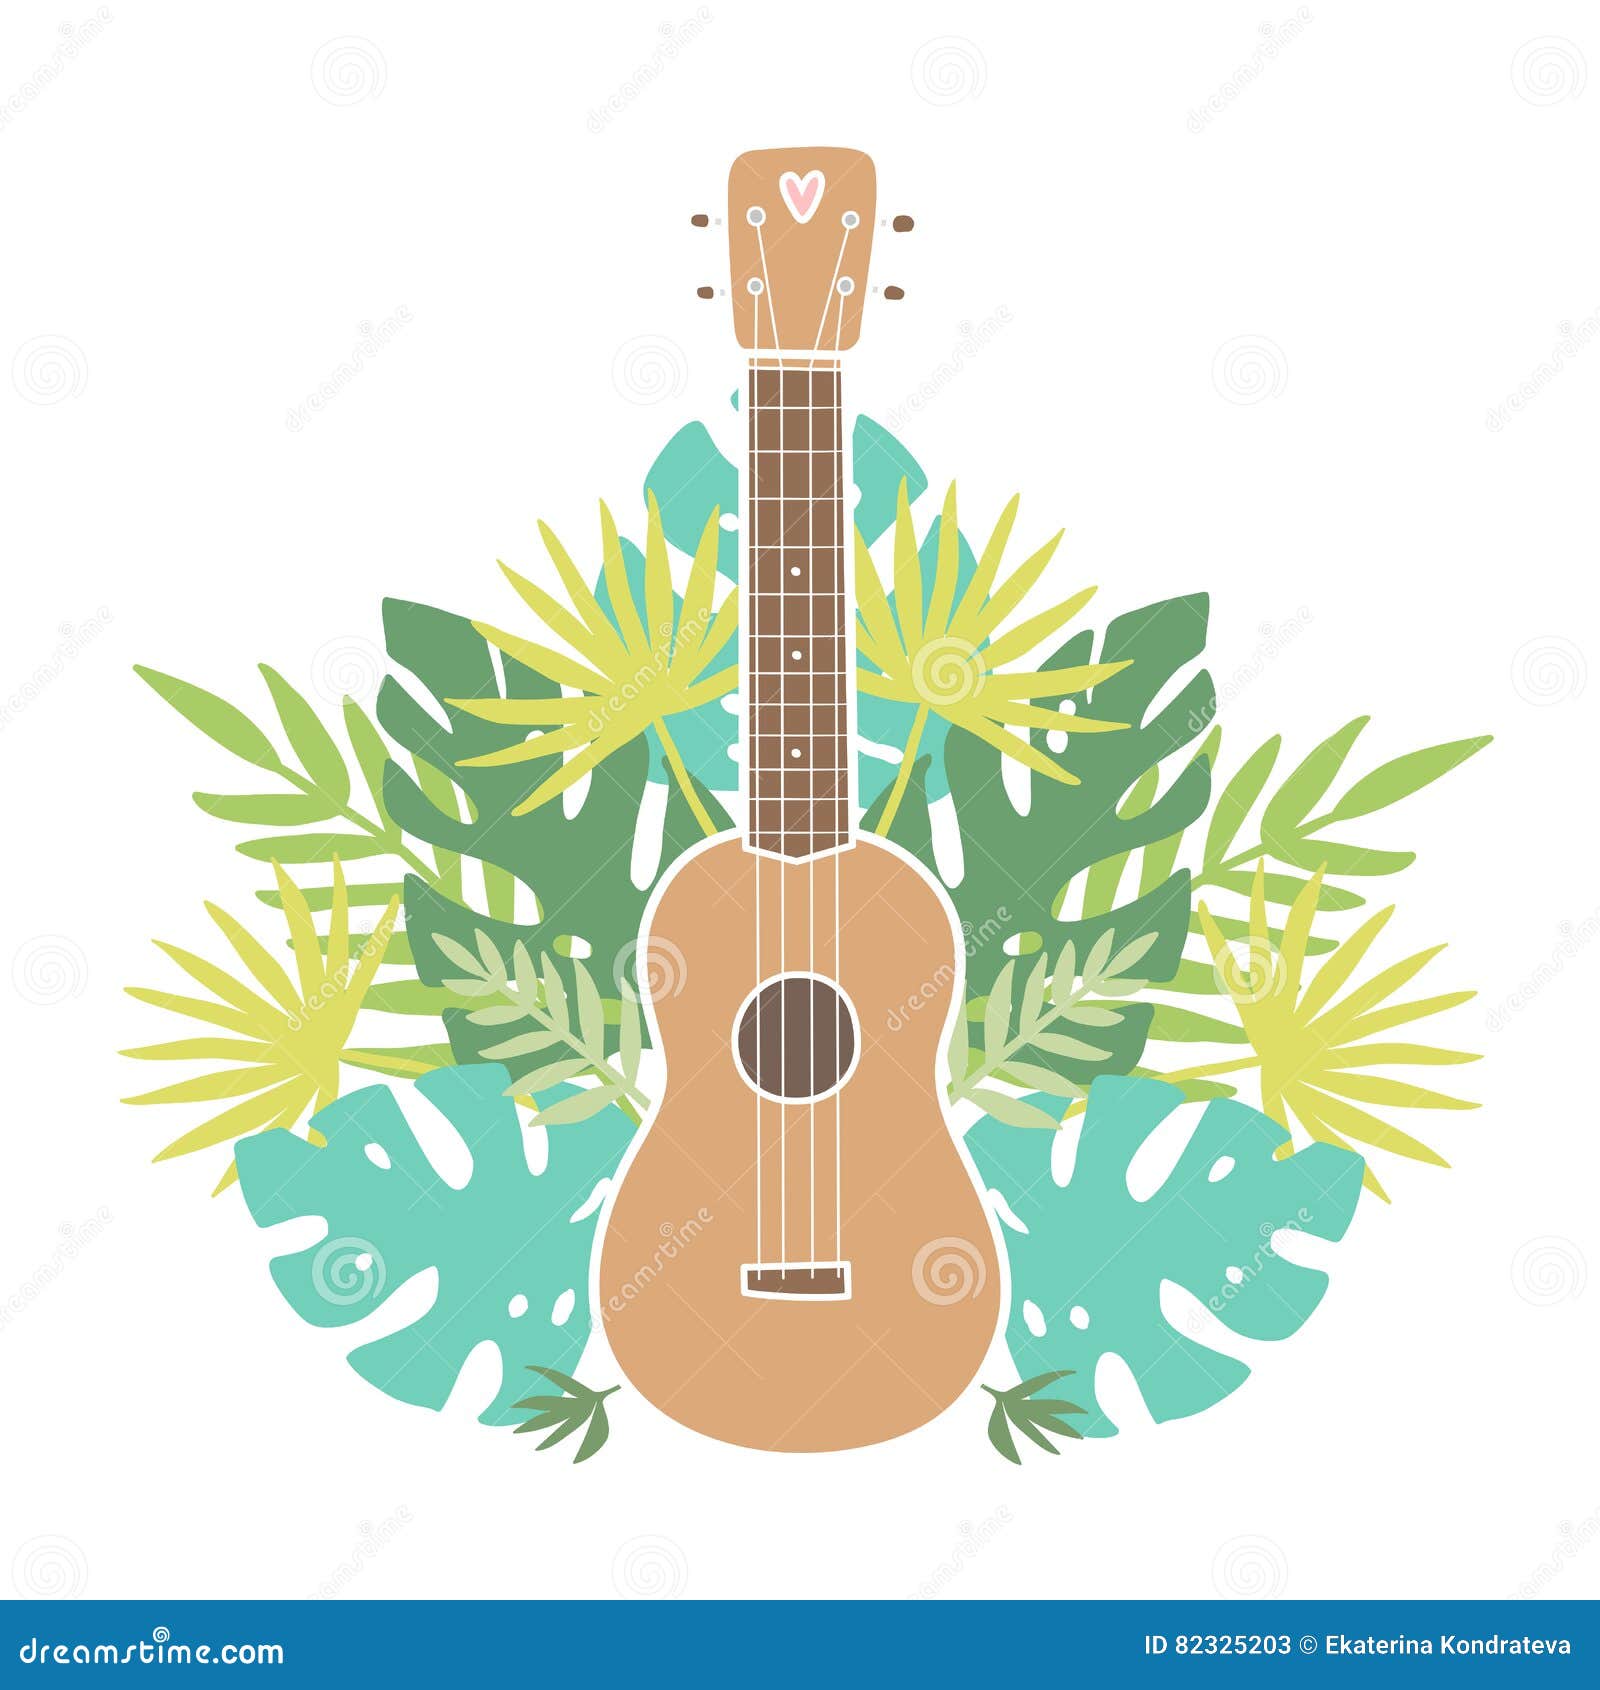 Ukulele Cartoons, Illustrations & Vector Stock Images - 3815 Pictures